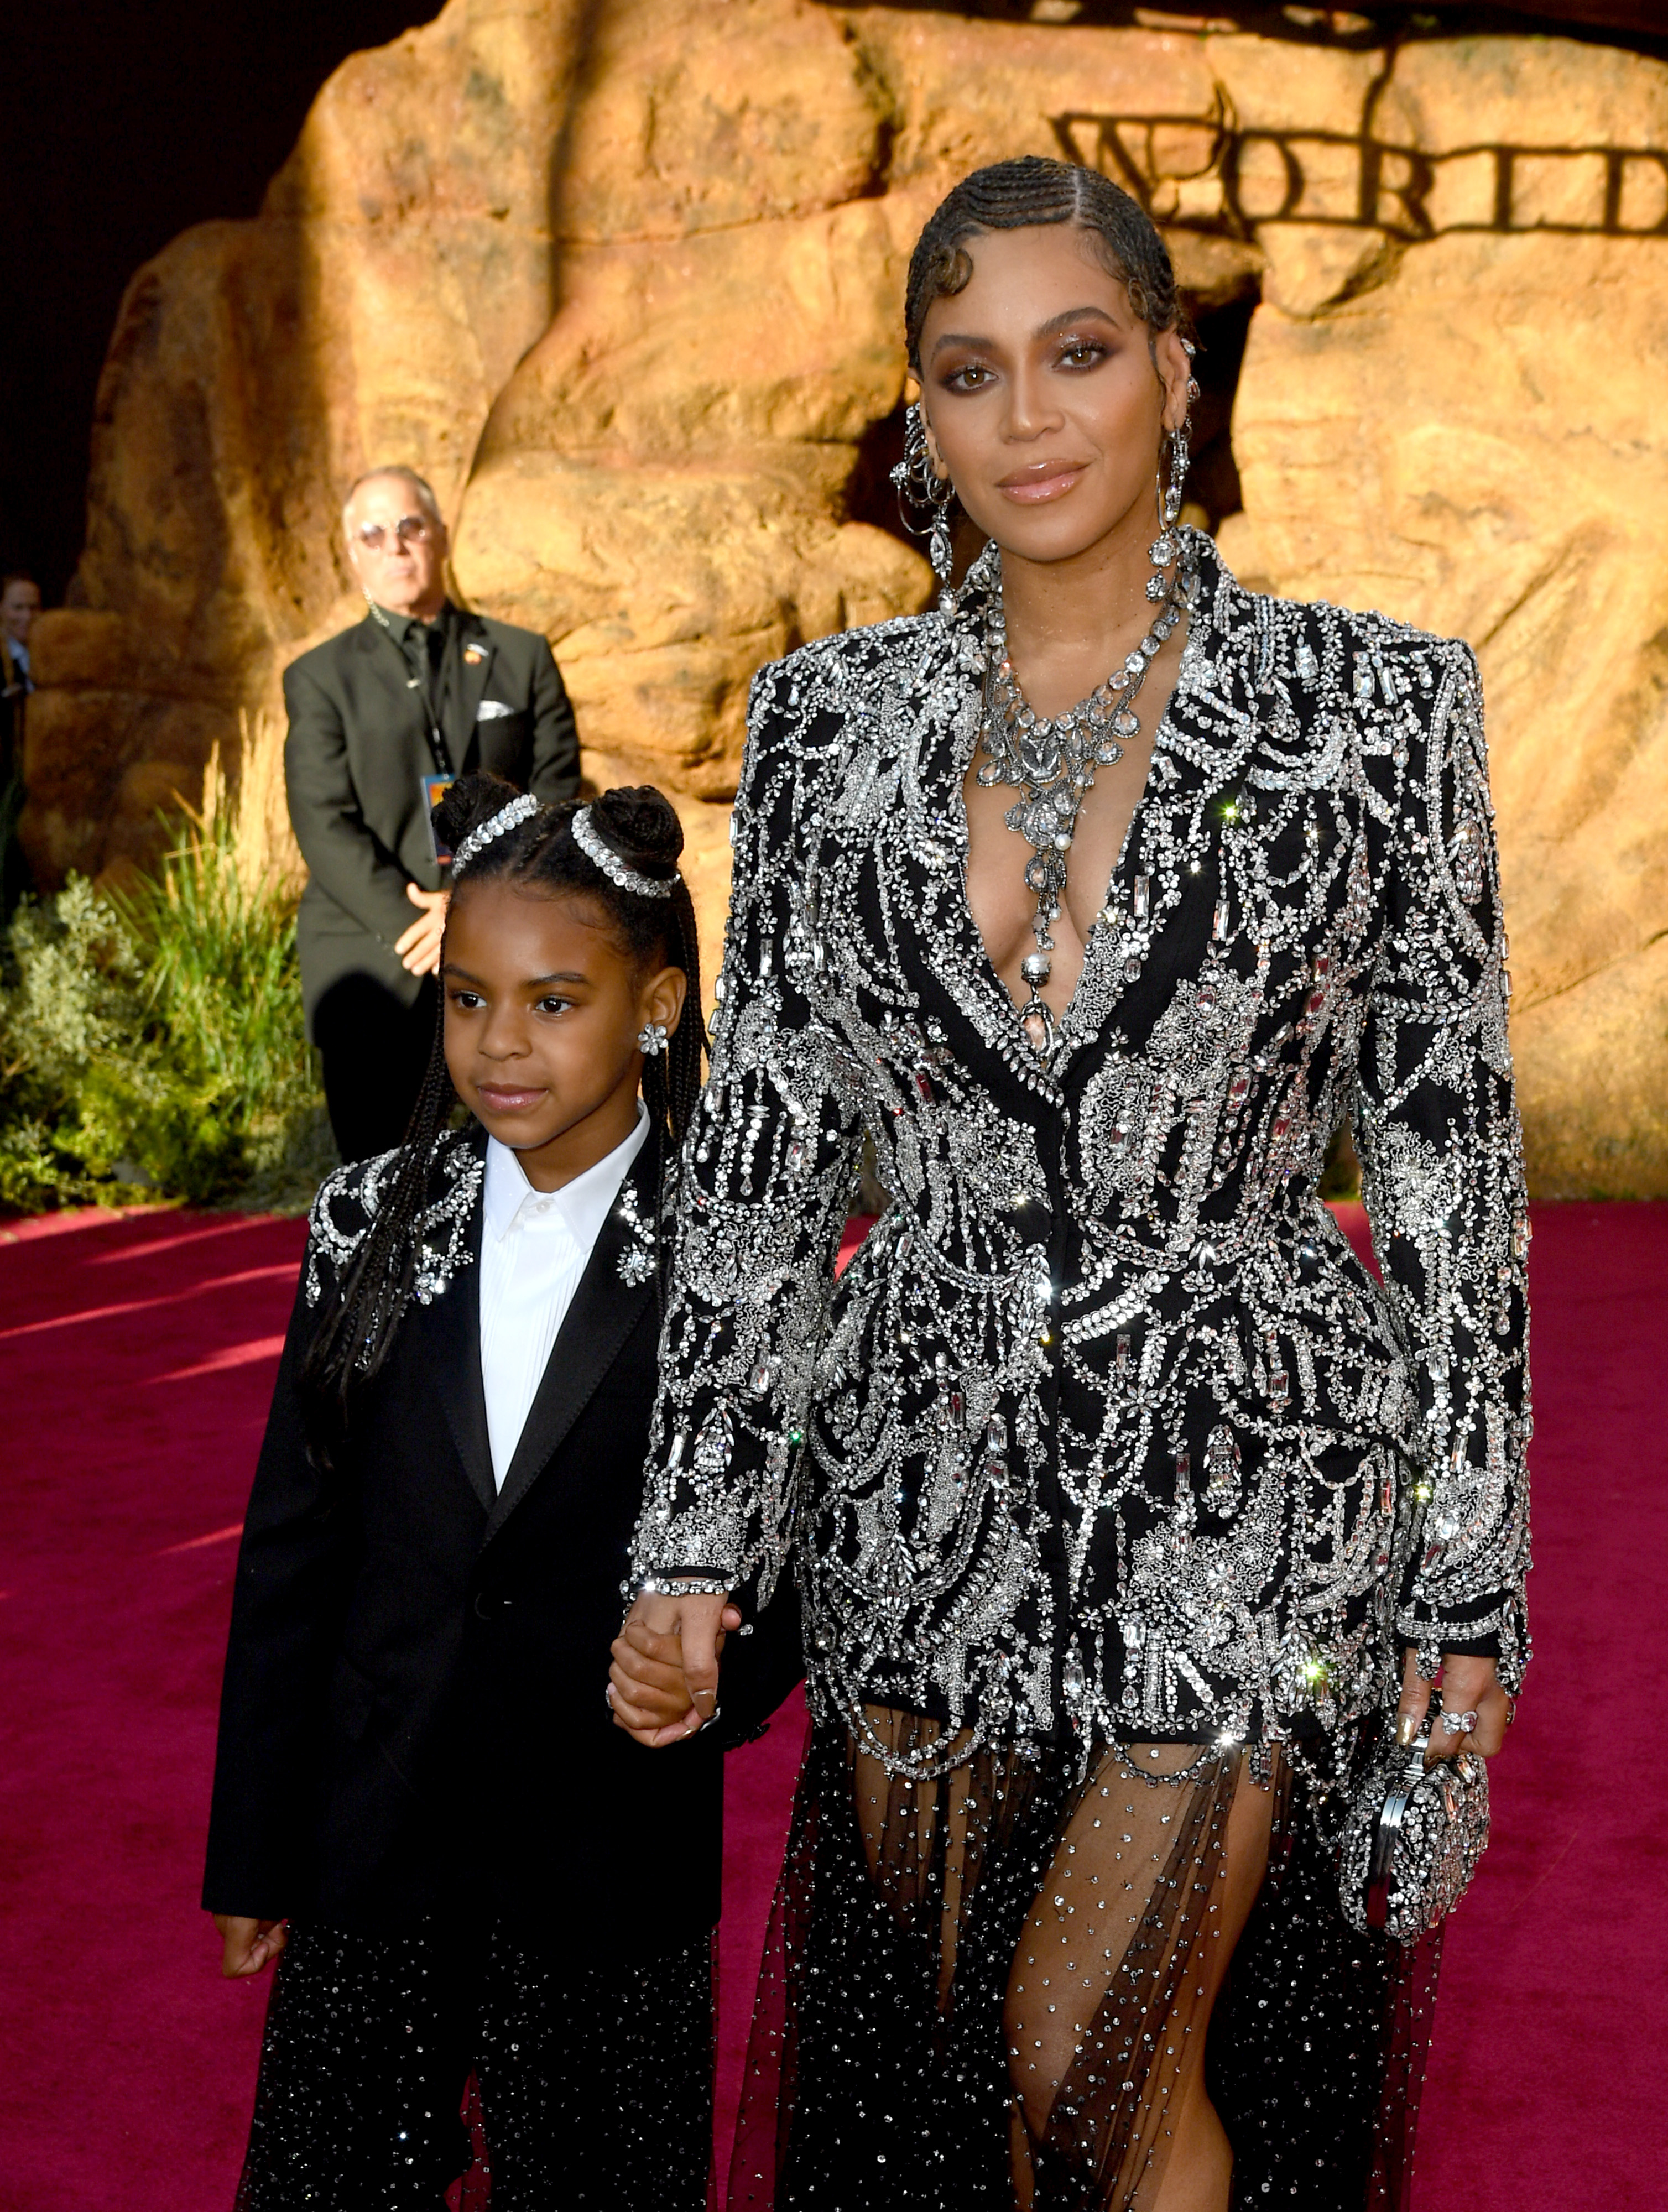 Blue Ivy Carter and Beyoncé Knowles-Carter at the premiere of "The Lion King" in Hollywood, California on July 9, 2019 | Source: Getty Images